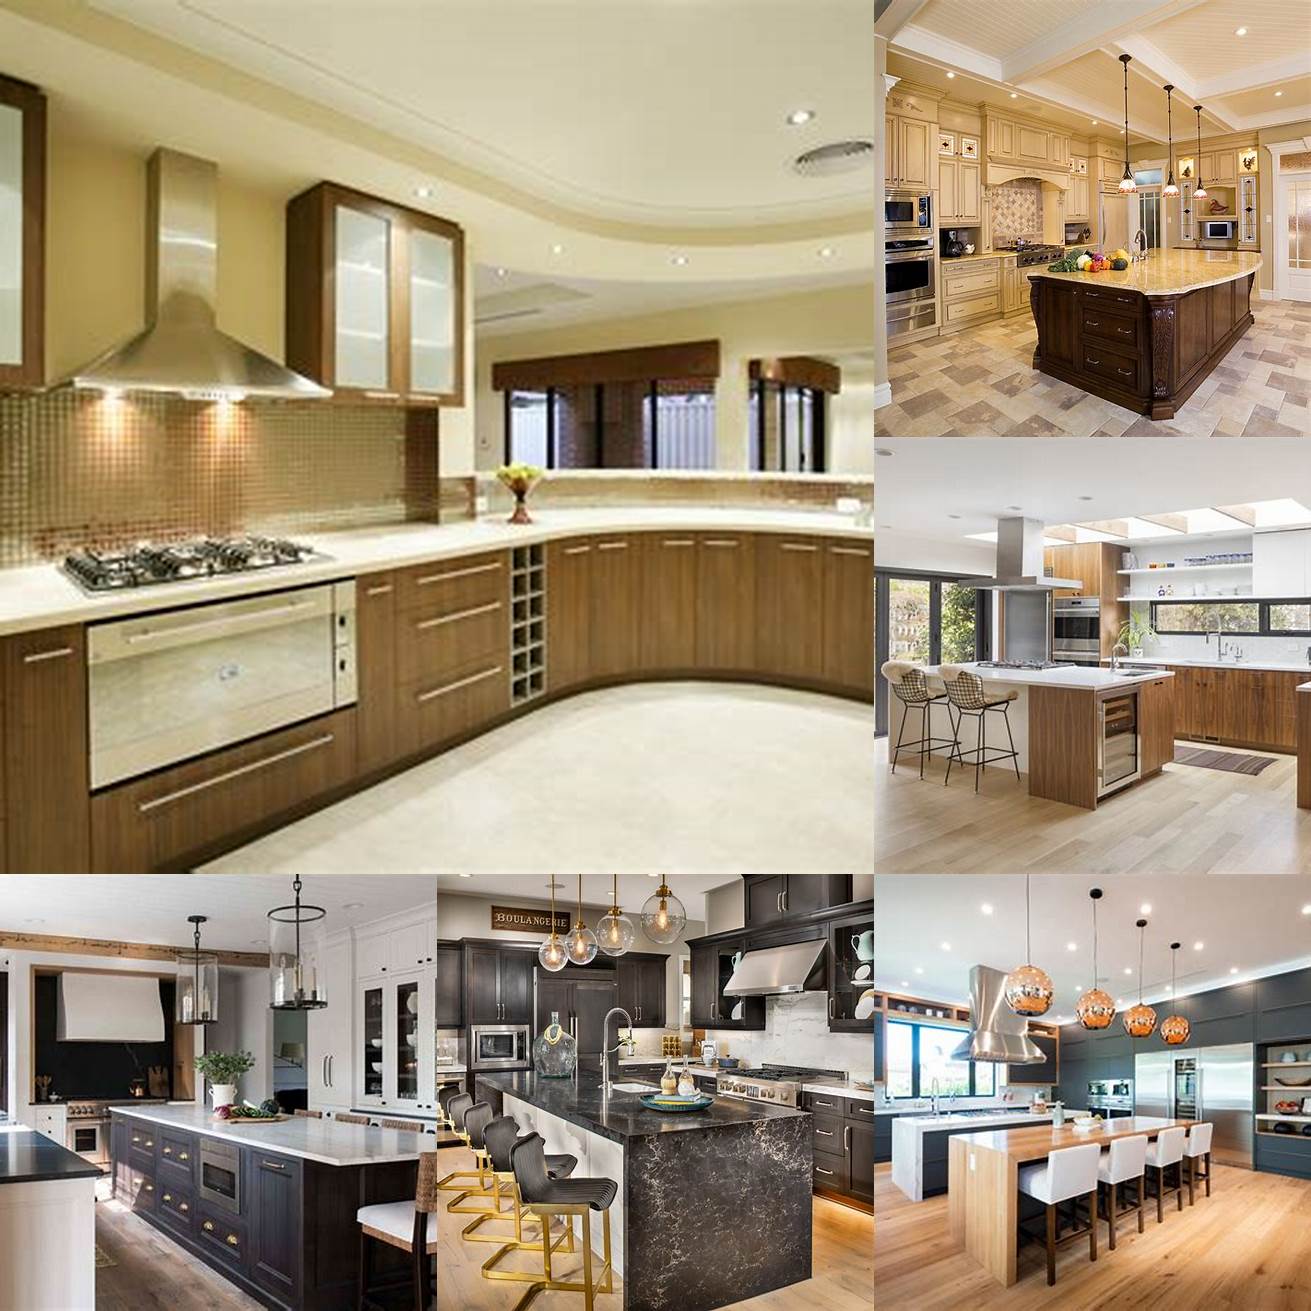 Enhancing the look of your kitchen